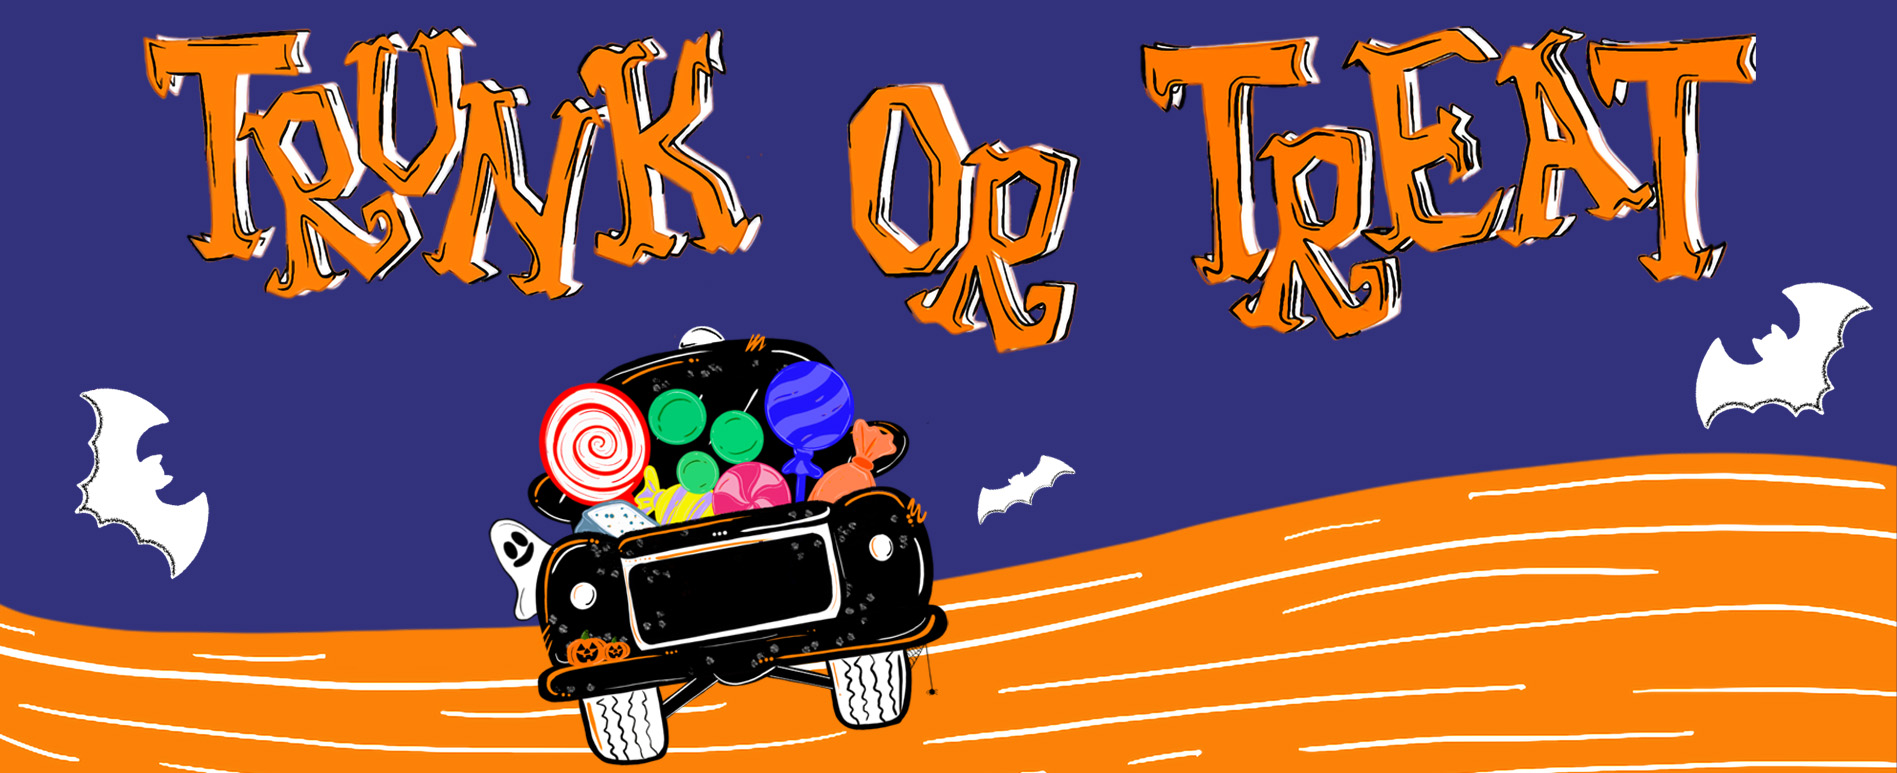 trunk or treat image for website